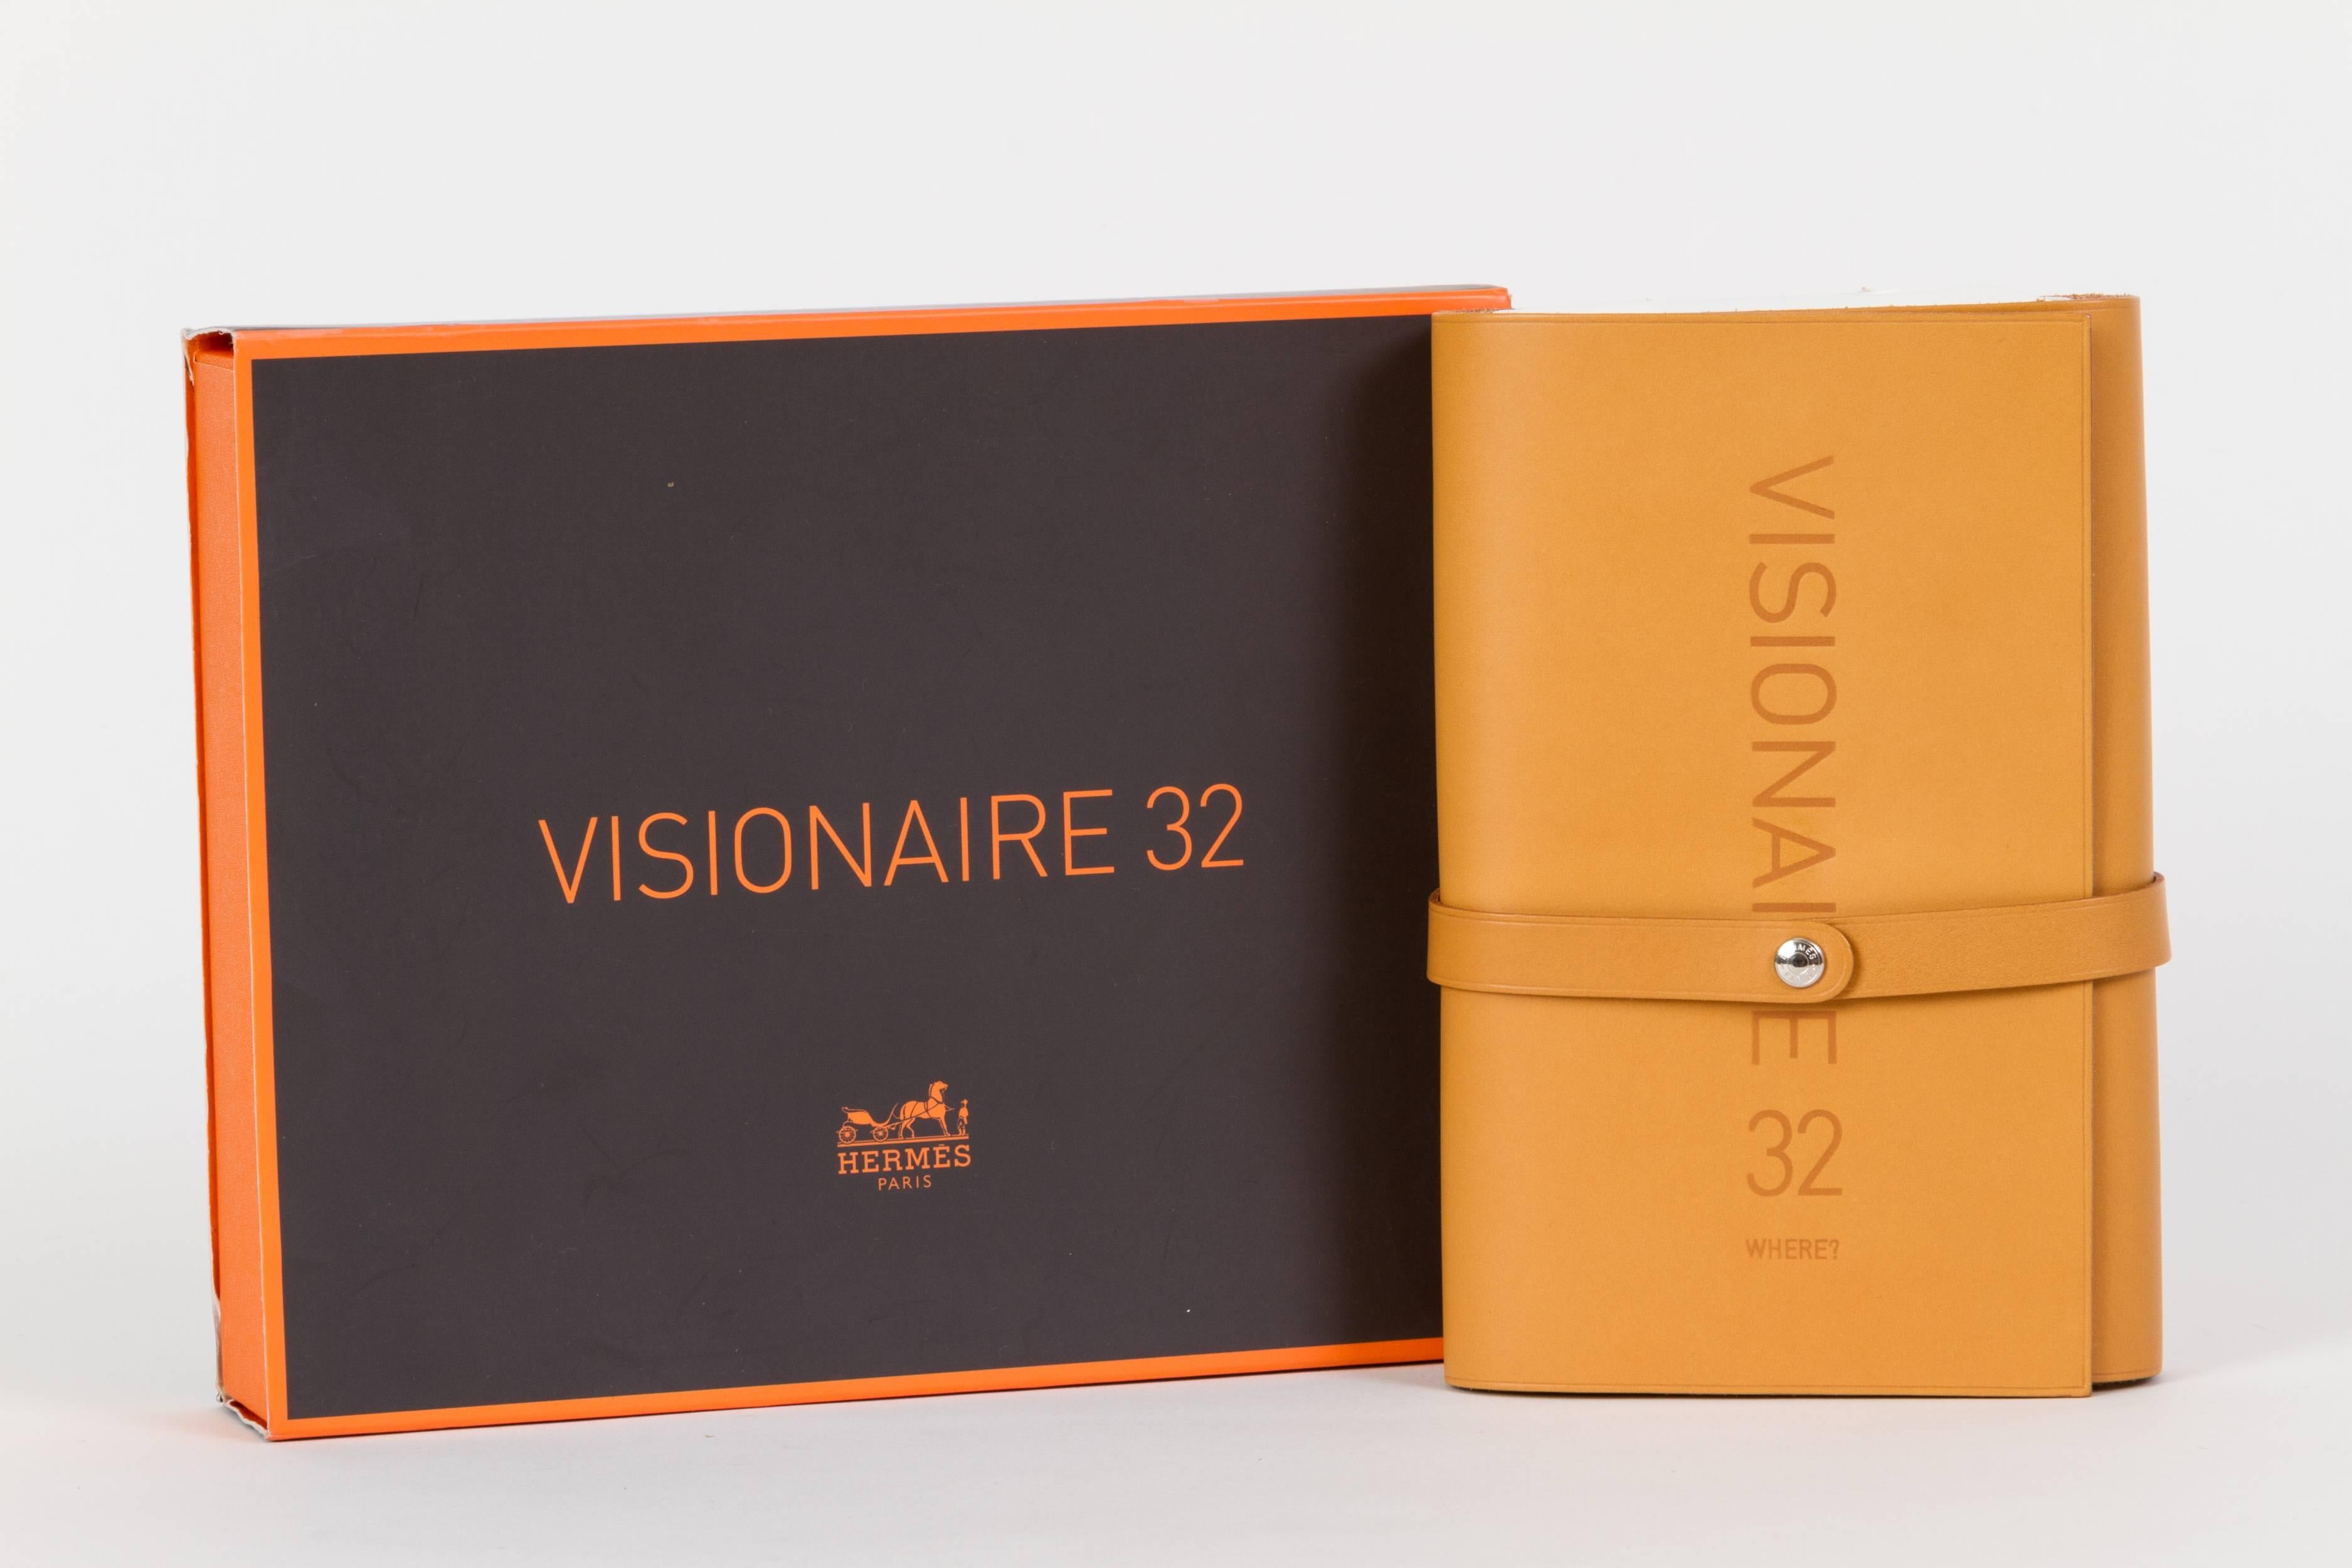 Visionaire collaboration with Hermès for issue #32, brings us this exquisite and collectible item. A set of 53 postcards in a leather shell. Unused. Comes with duster and box.
